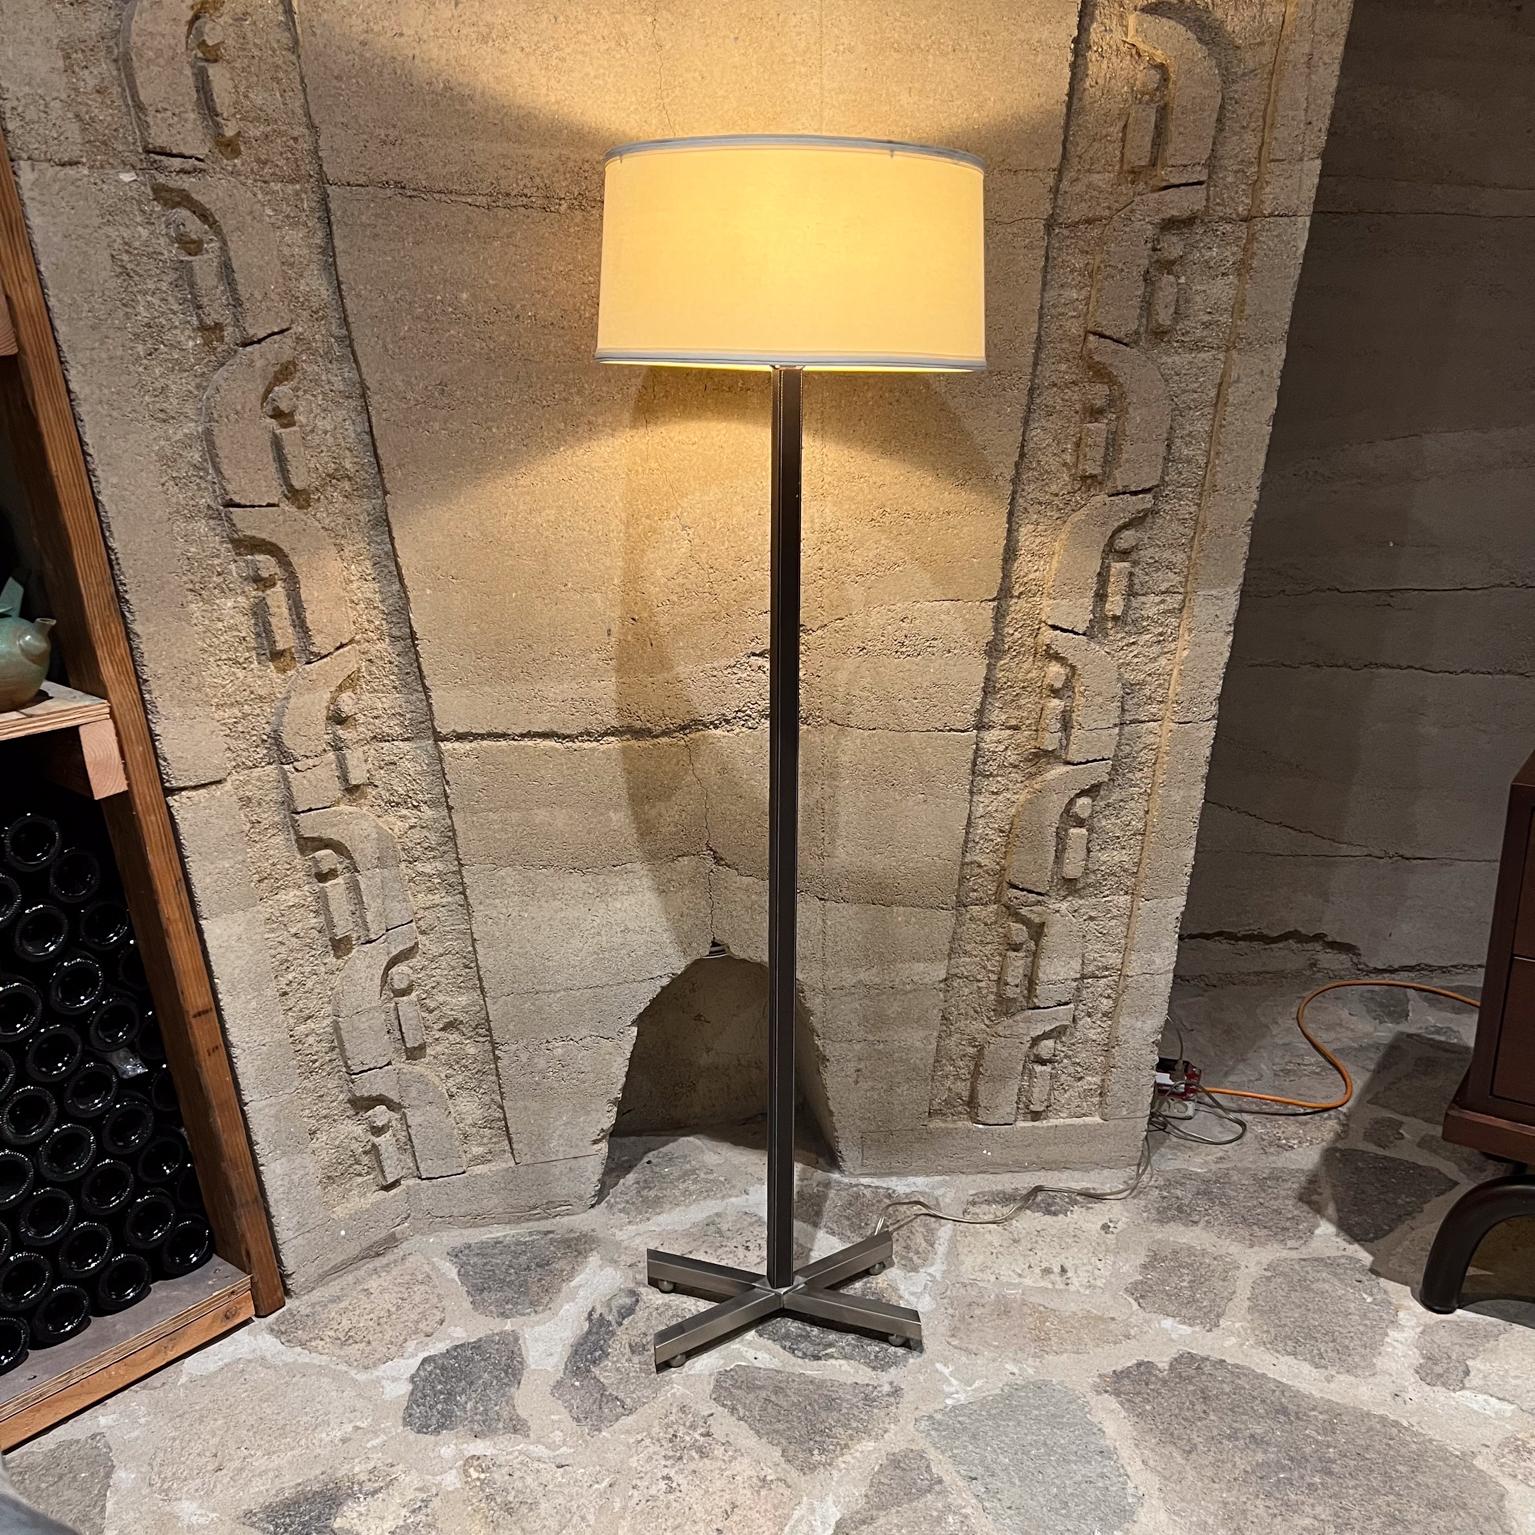 Modern Steel Leather Floor lamp
50 h to socket 54.25 to finial x 13 w x 8 d
Nickel plated steel. Base has an X shape mounted on steel balls.
Heavy base solid steel, not hollow.
No label present. In the style of Paul Dupré-Lafon.
Body appears to be